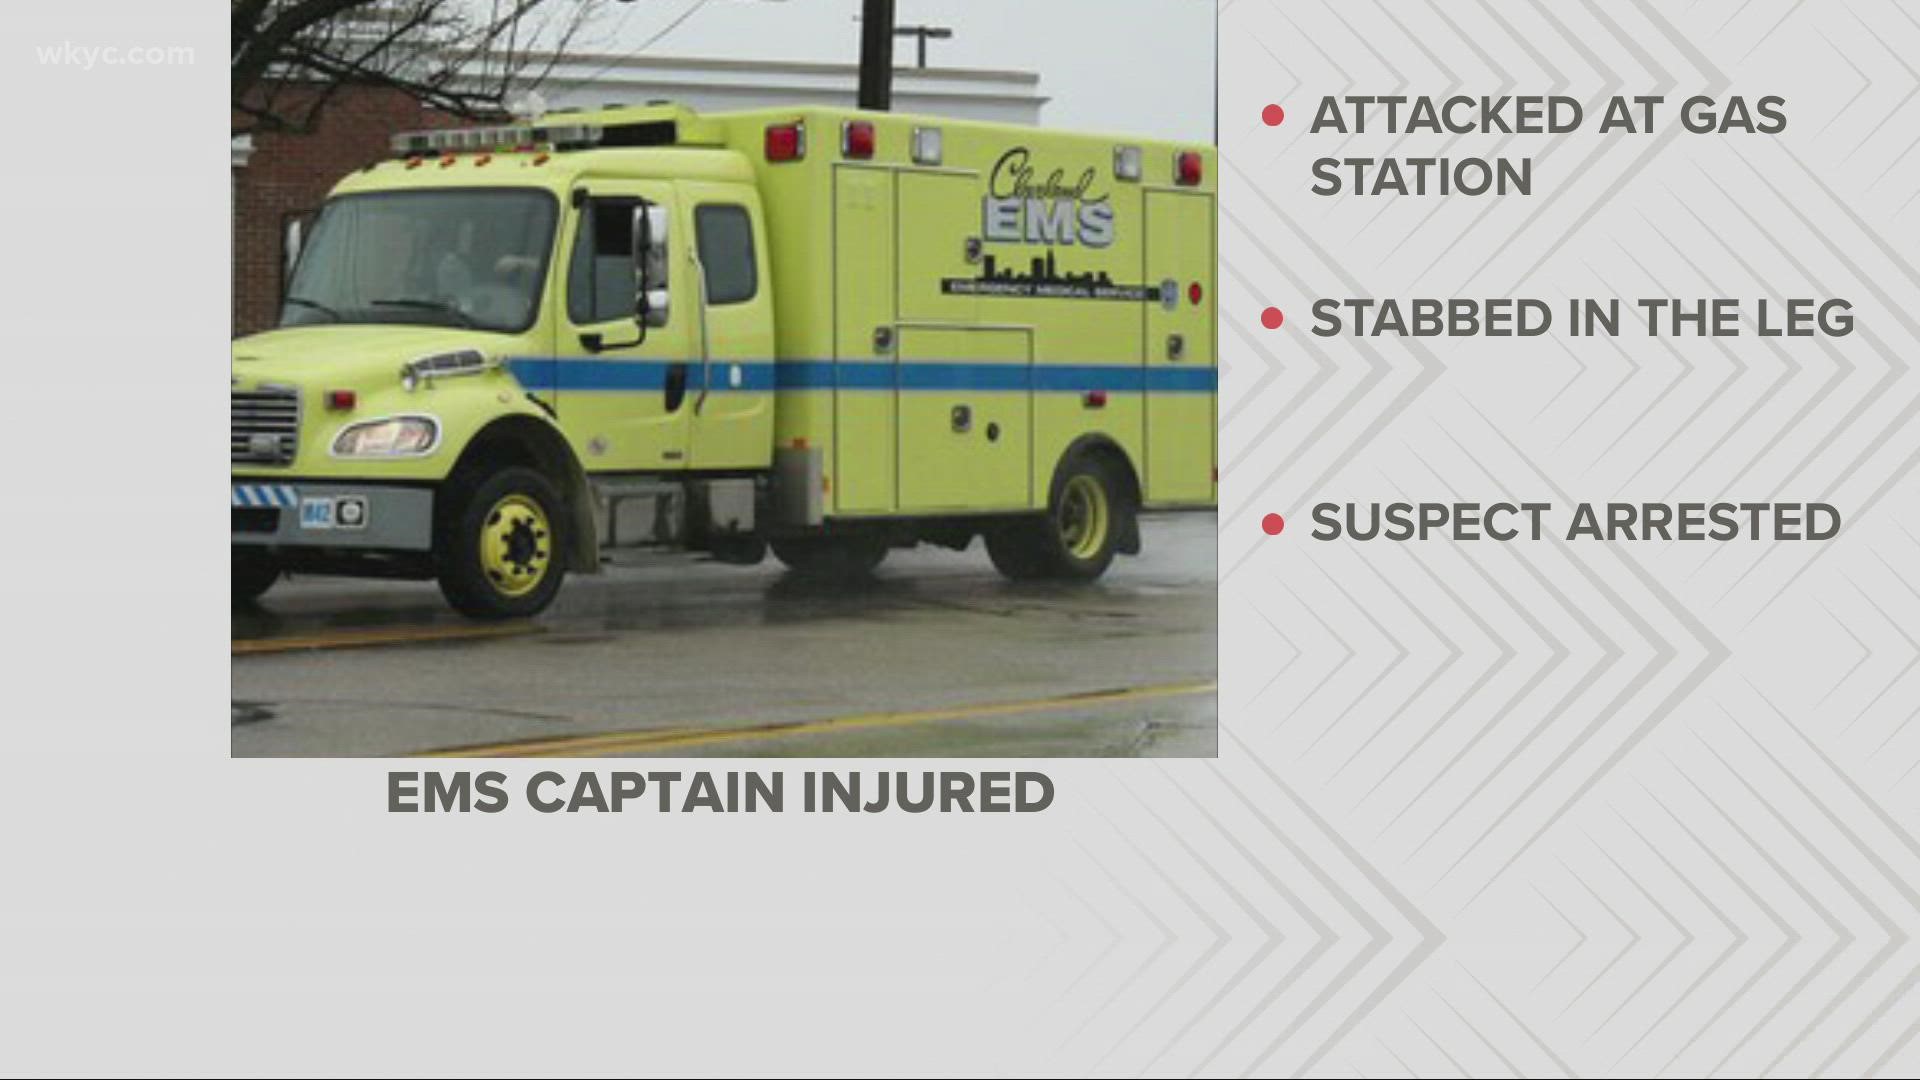 The incident happened at the Shell Gas Station at Memphis Avenue and Ridge Road. The EMS captain was stabbed in the leg. The suspect has been arrested.